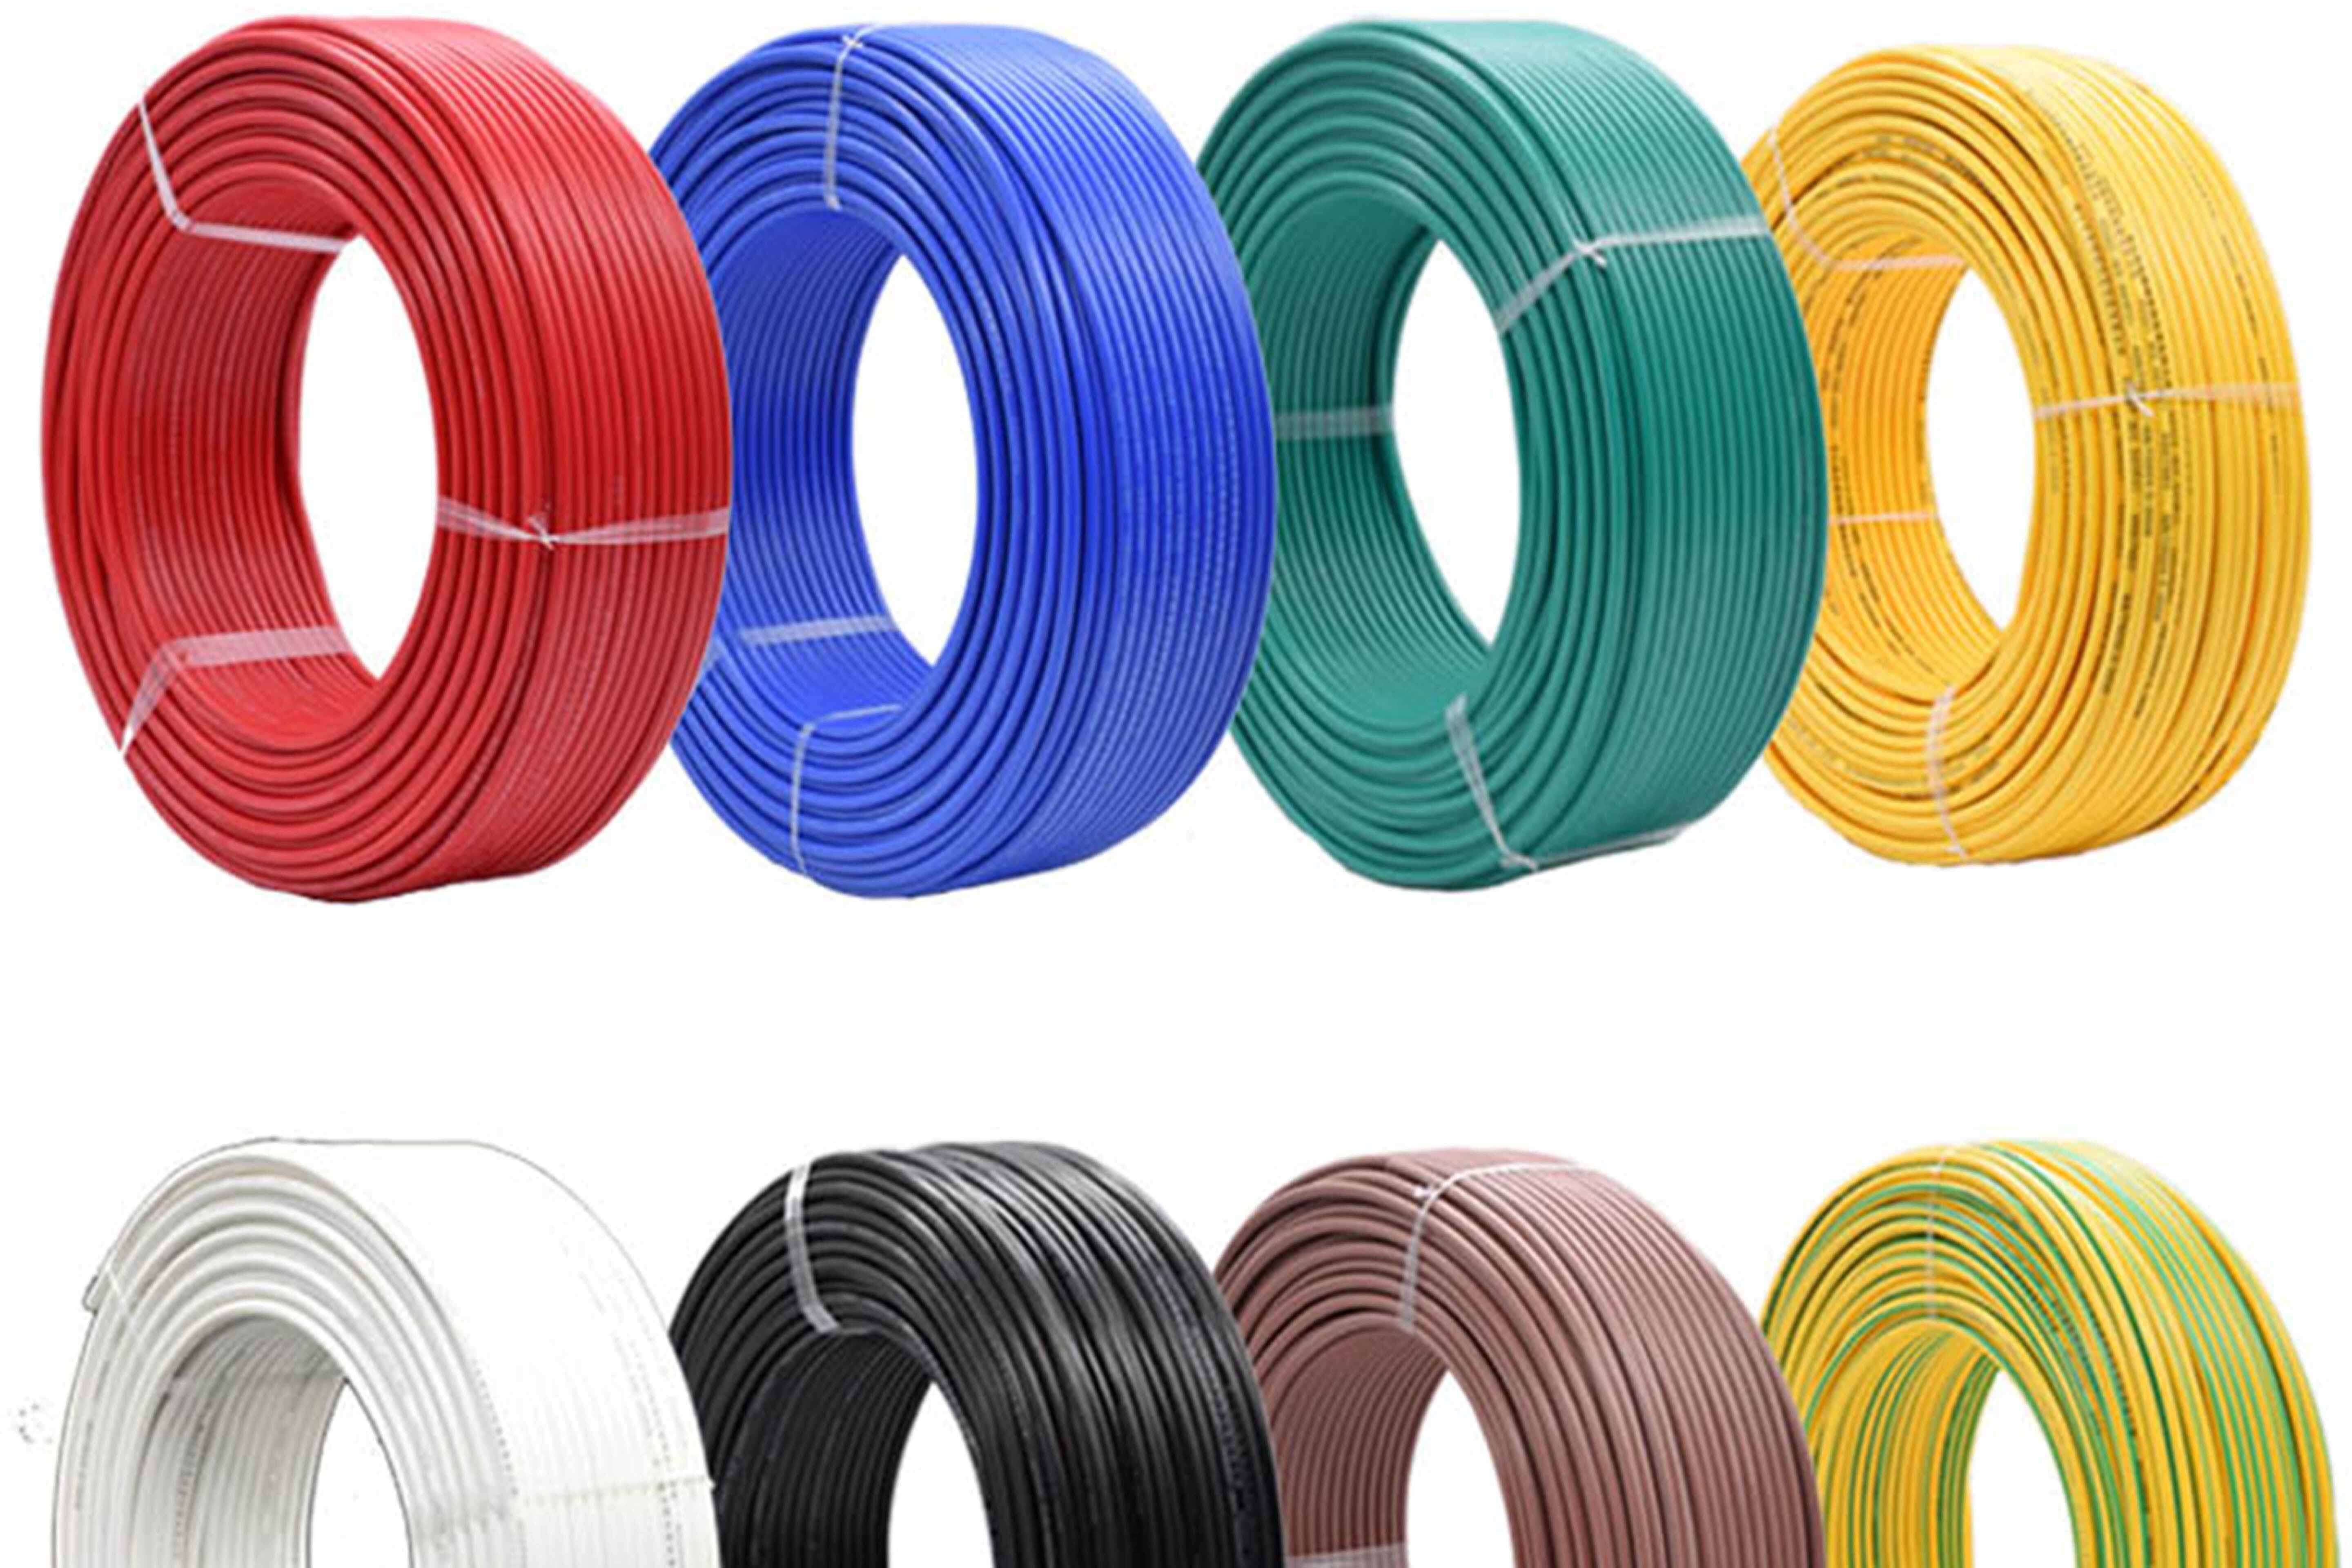 Industrial / Household Wires in India